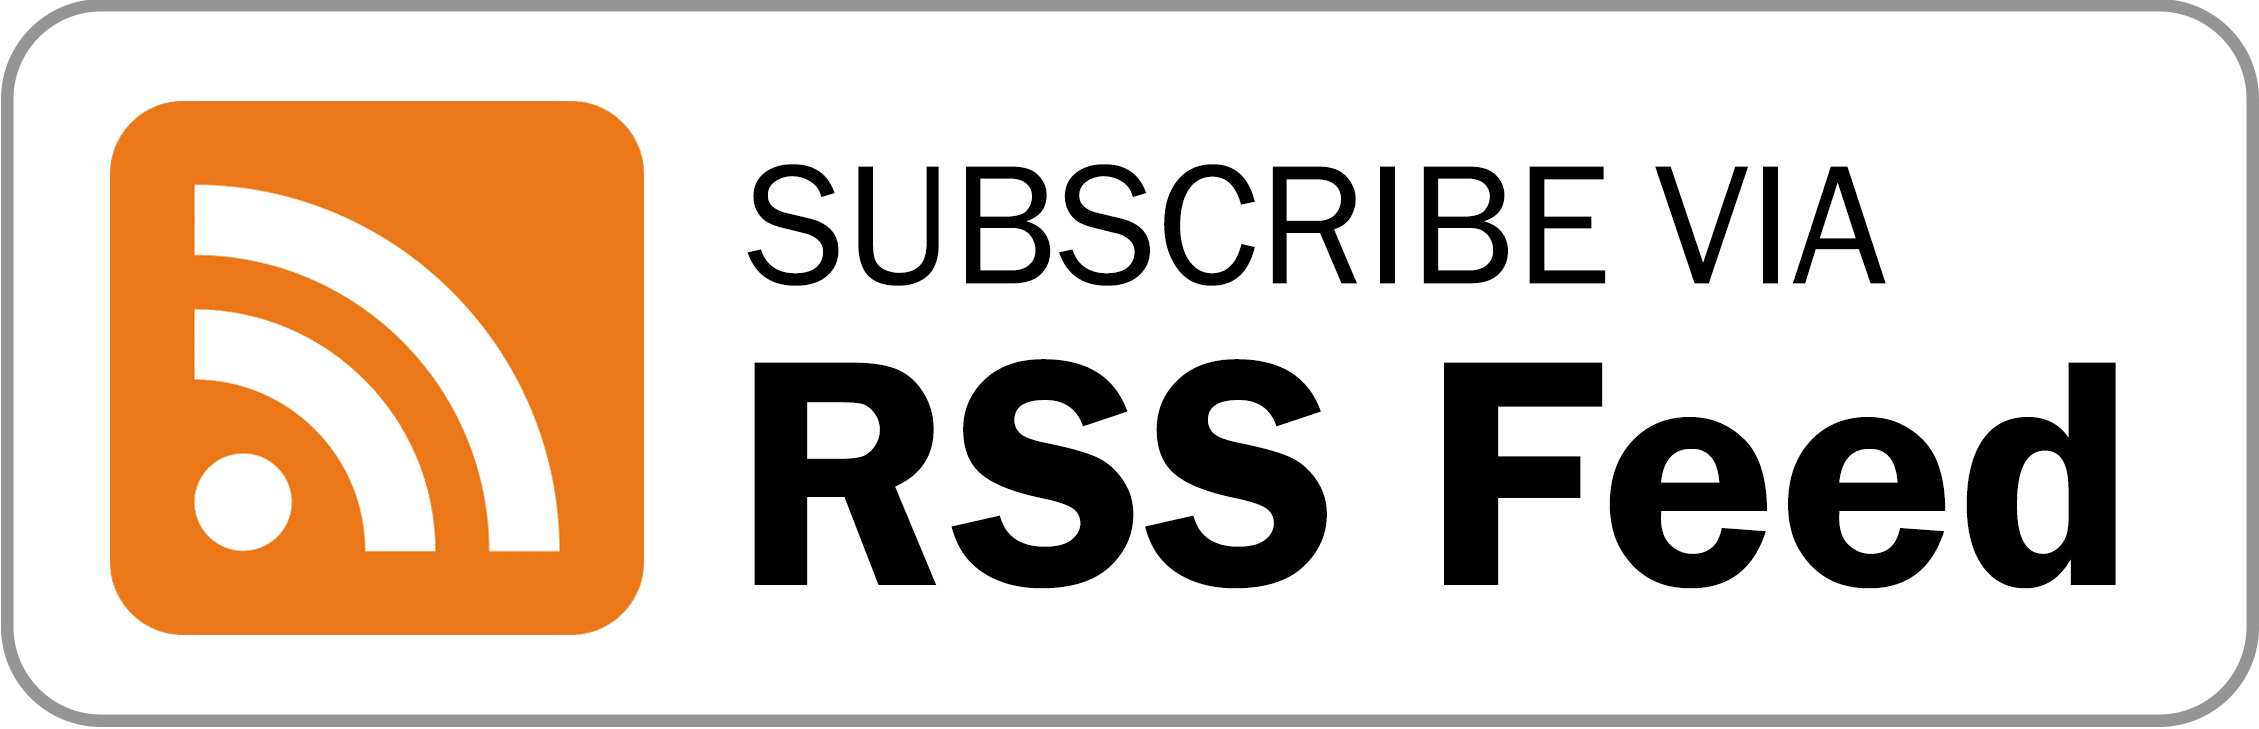 Subscribe via RSS Feed